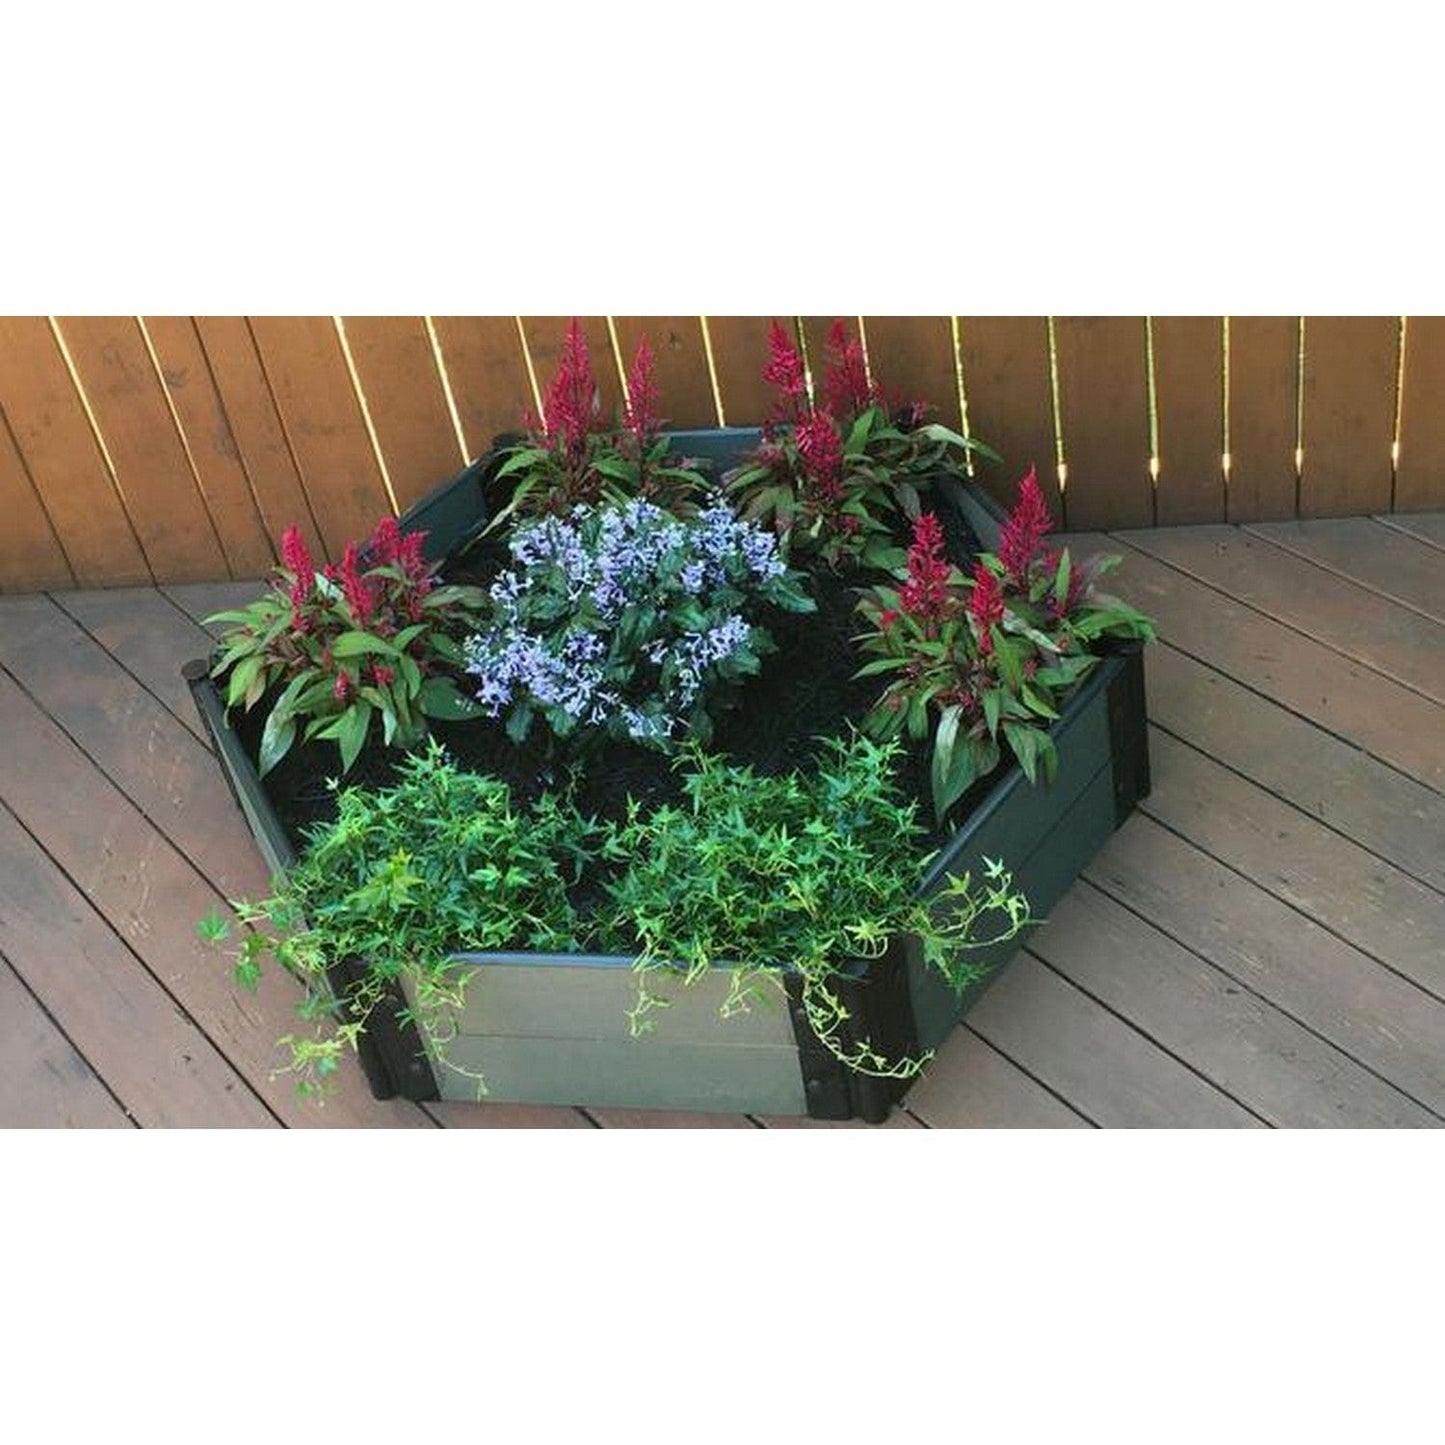 Frame It All Gardening Accessories Frame It All | Tool-Free Fort Jefferson Raised Garden Bed (Hexagon) 4' X 4' X 22" - Uptown Brown - 1" Profile 200004469